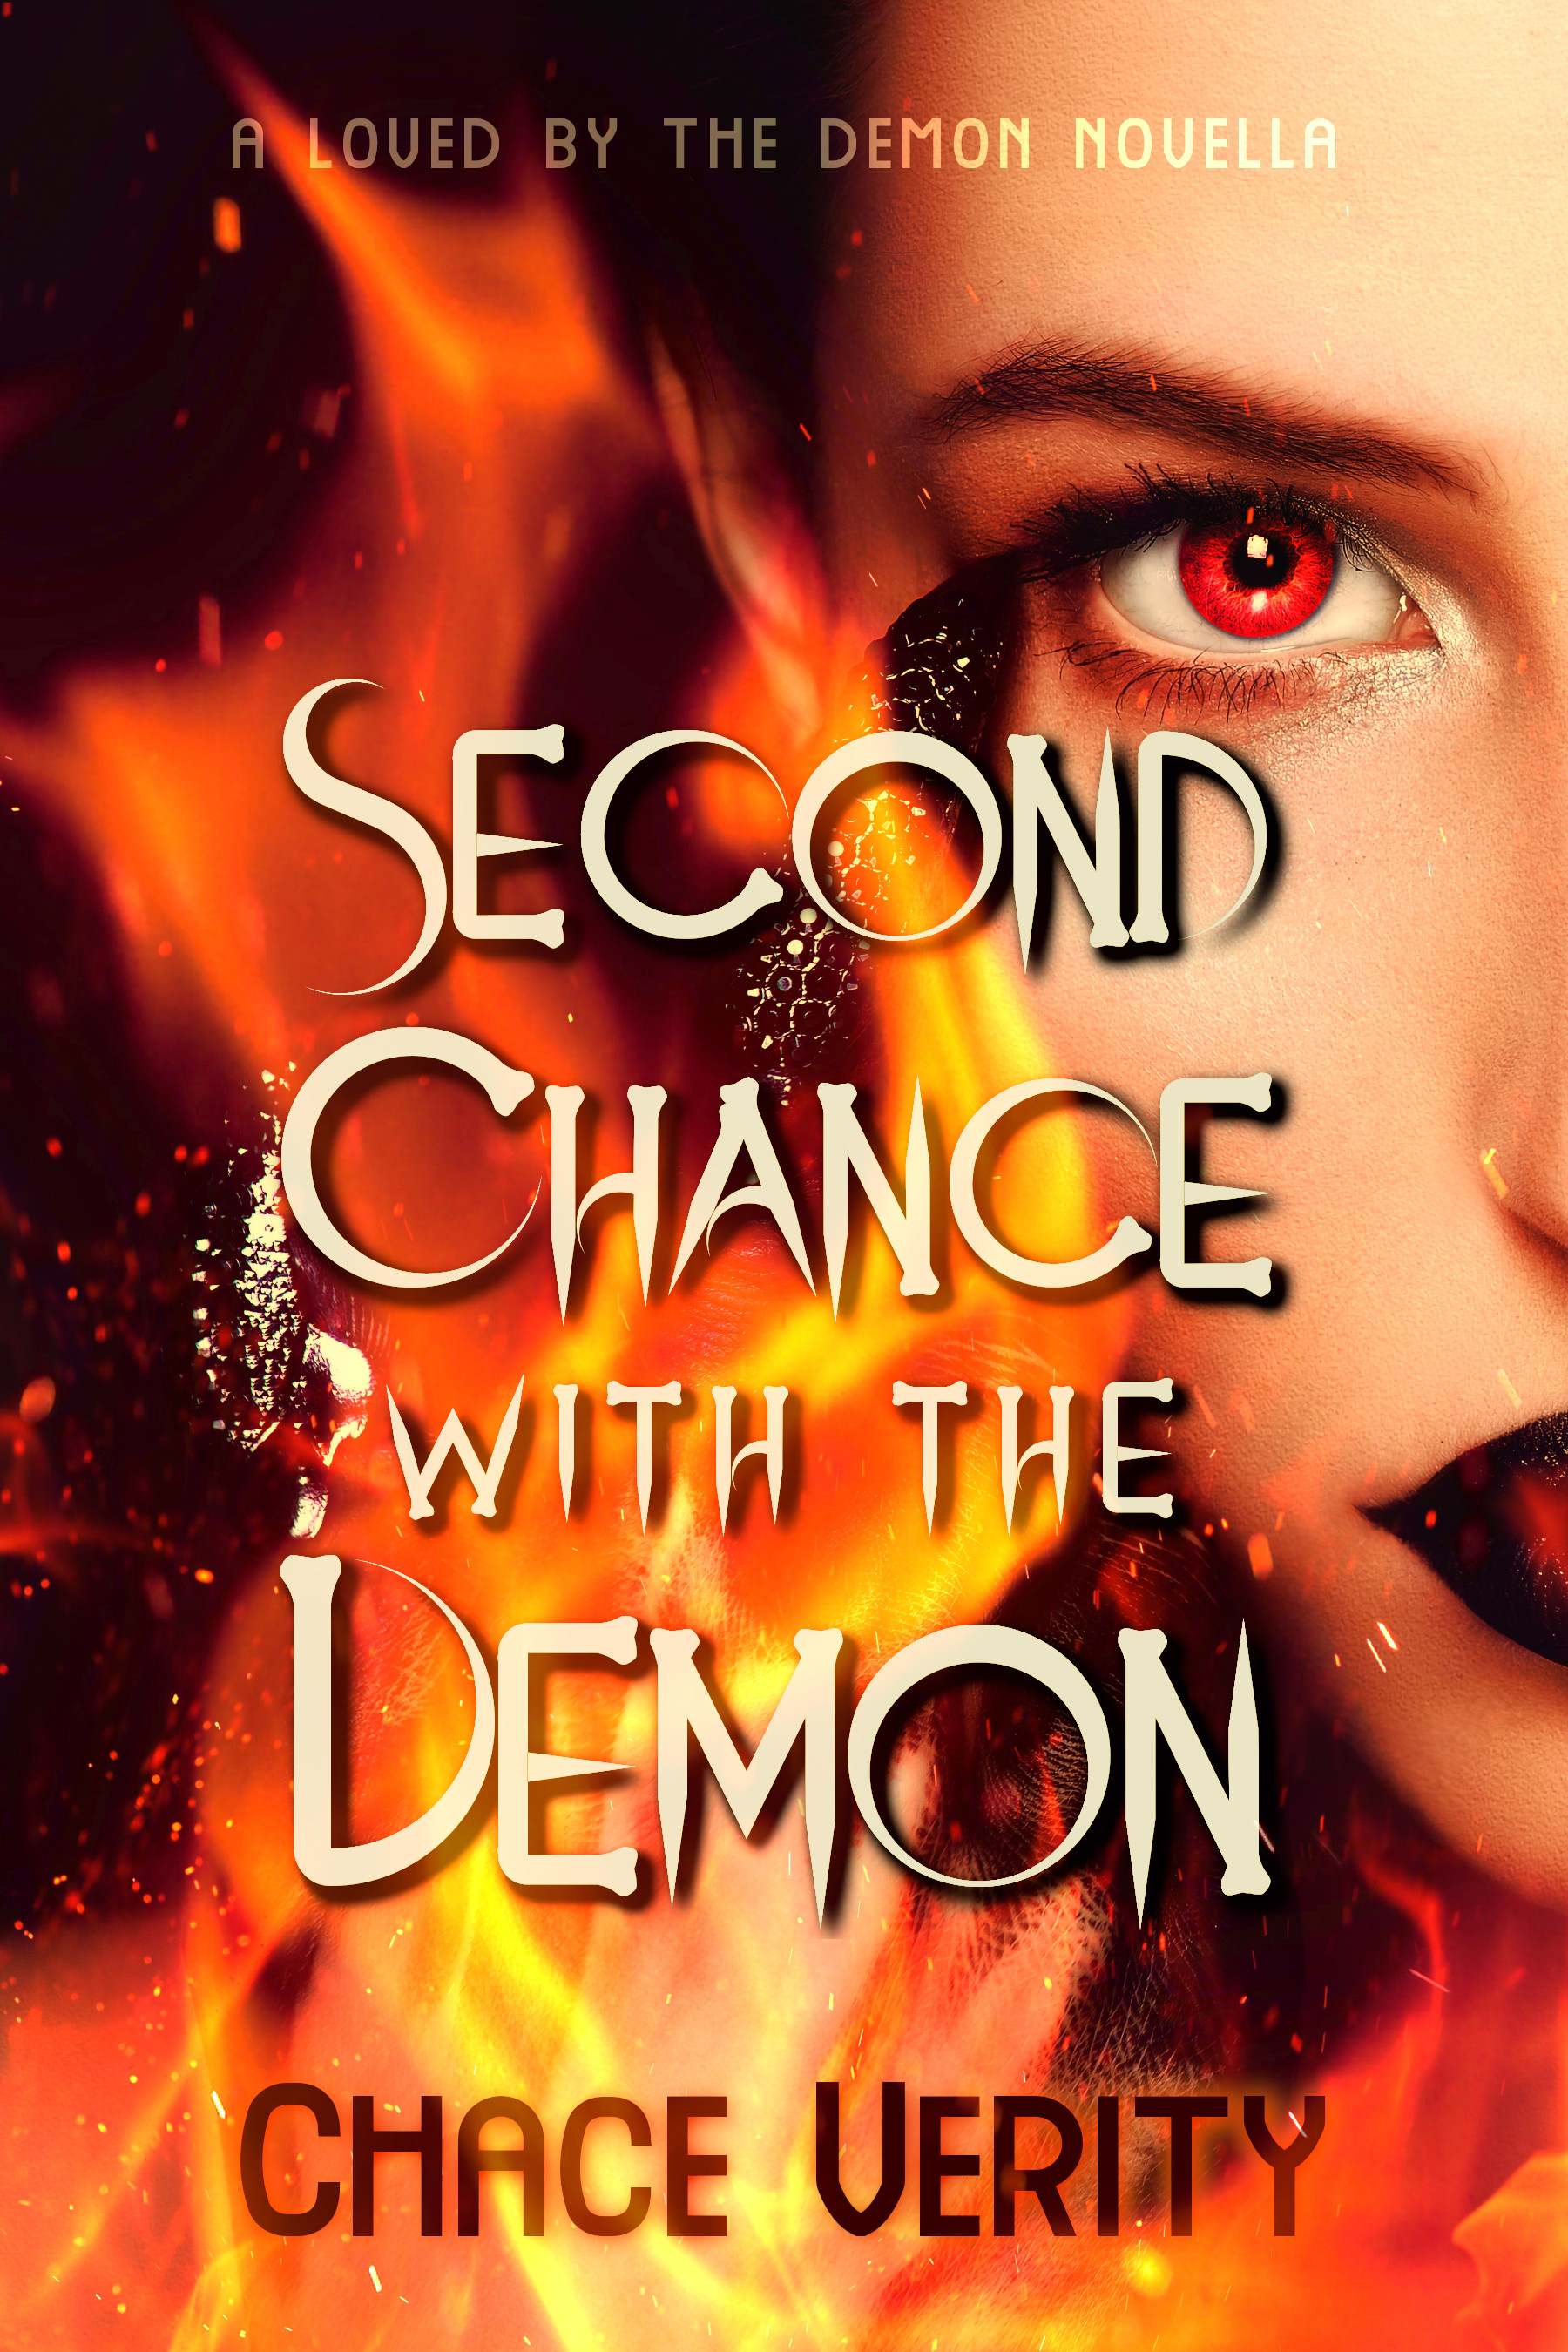 Cover for Chace Verity's <i>Second Chance with the Demon</i> featuring a red-eyed pale woman with dark makeup and black talons surrounded by fire